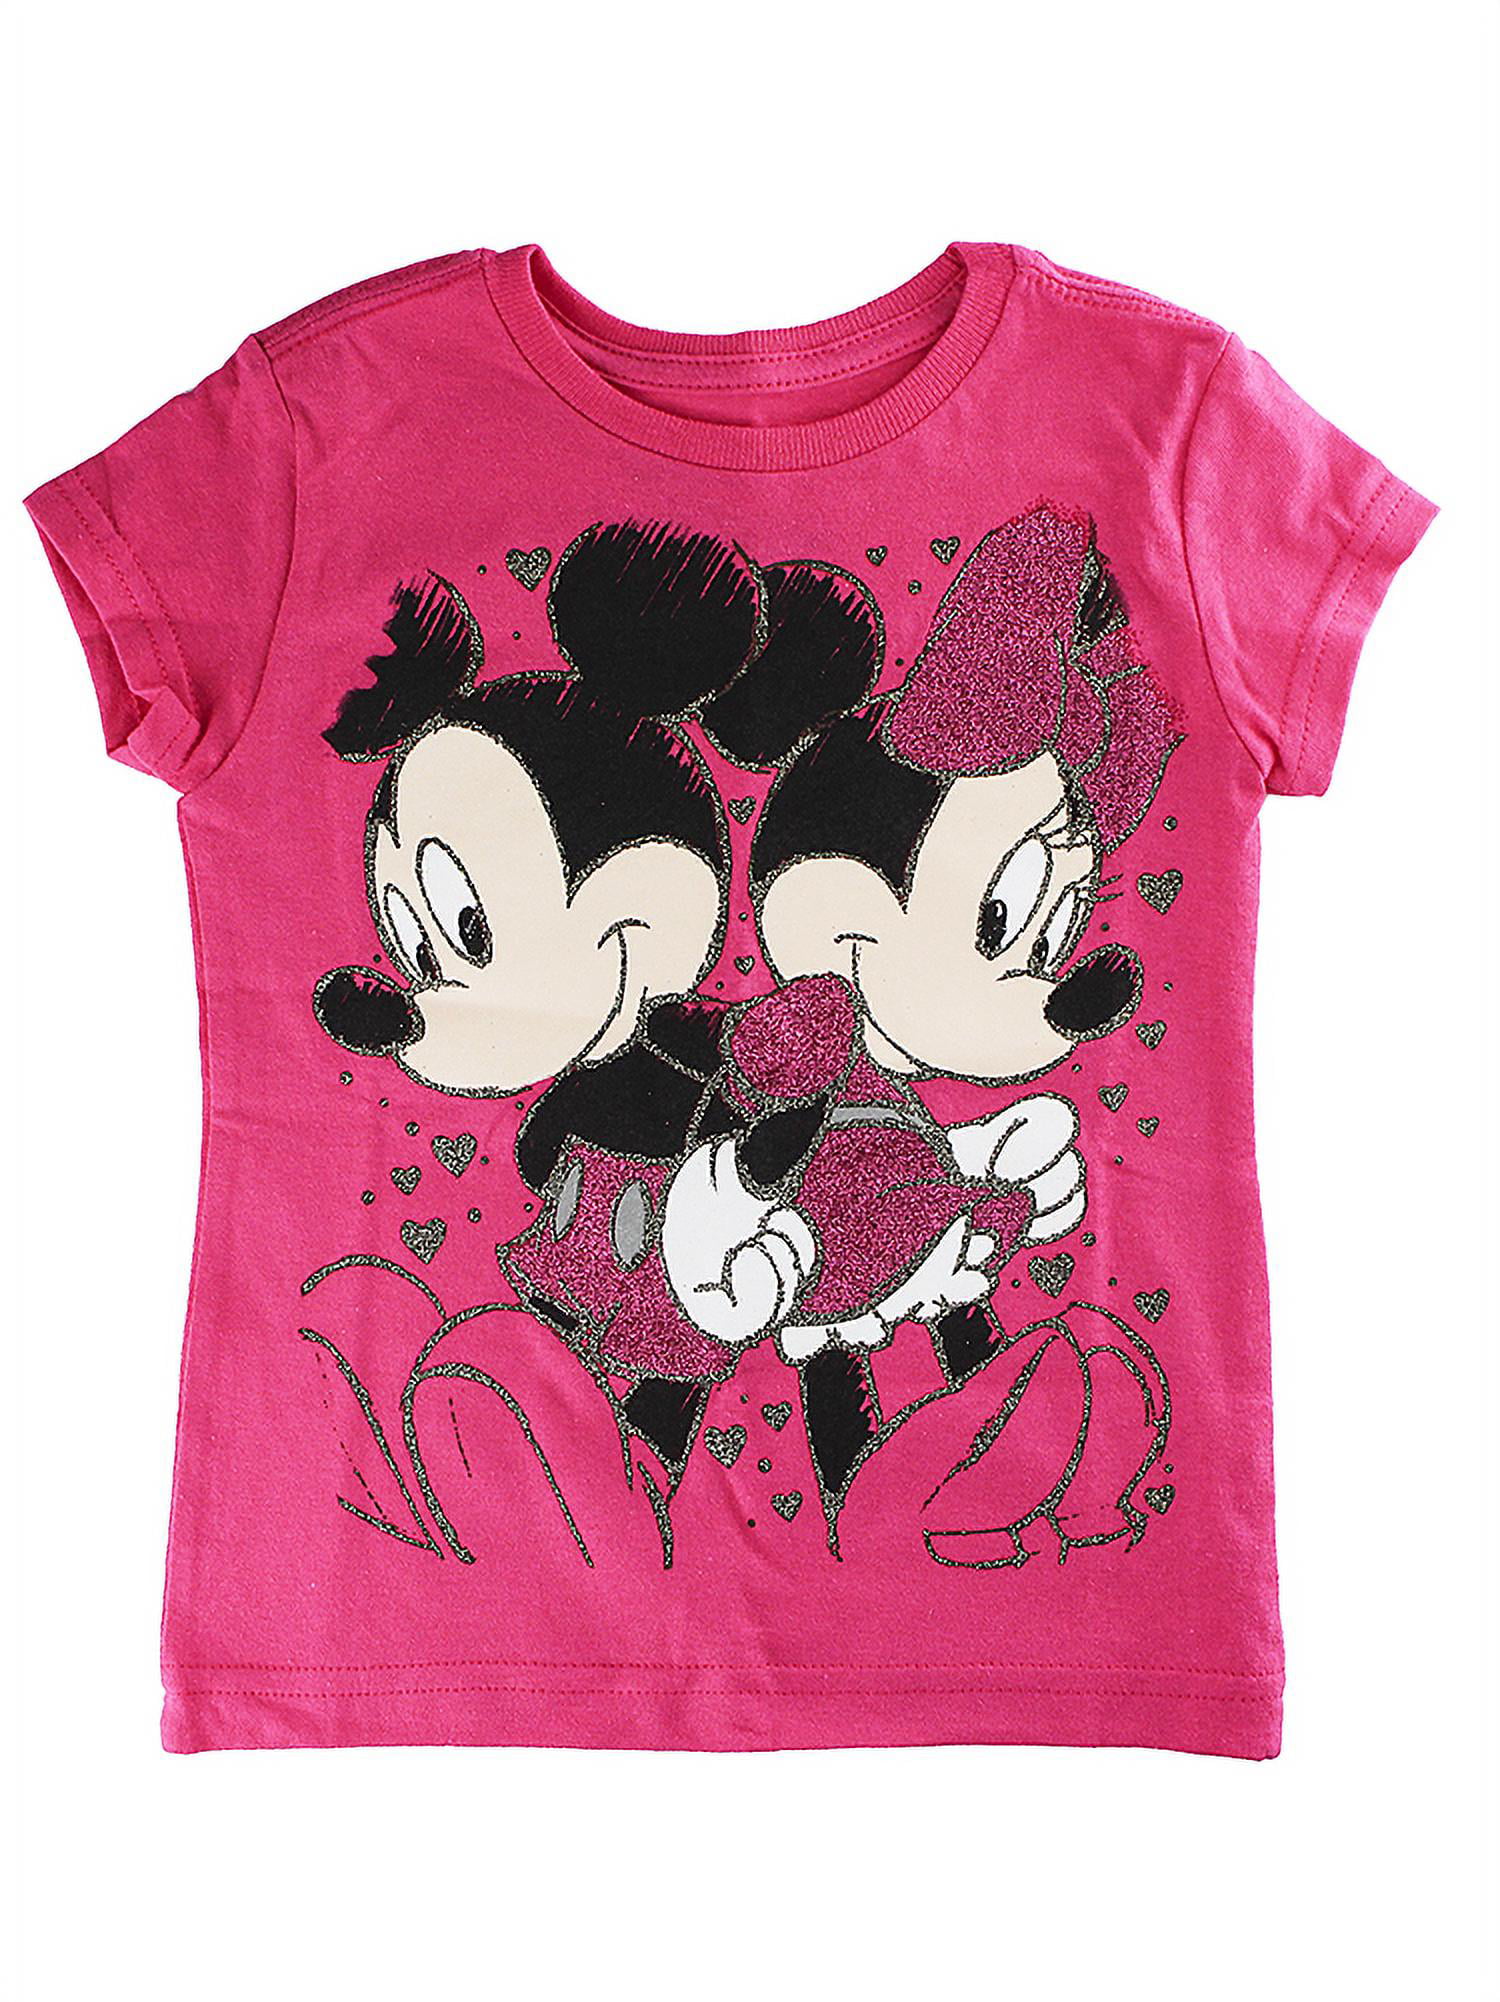 NEXT Blue Mickey Mouse Flip Sequin Long Sleeve T Shirt Top Age 2-3 Years NEW 